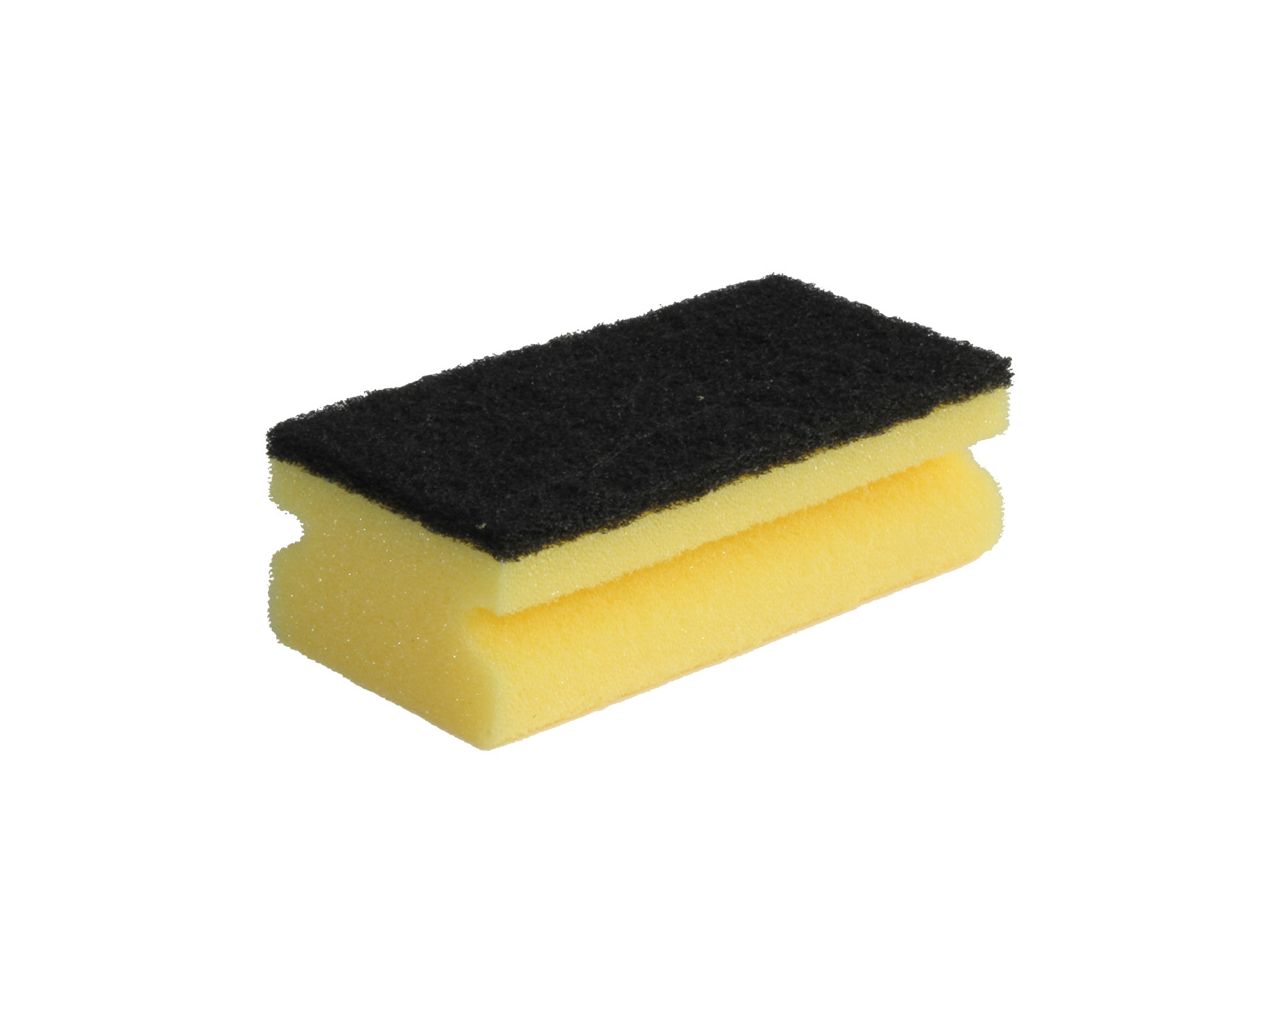 Easy grip foam backed scourer for professional use on hard surfaces,        10 pcs. / package (yellow with black scouring surface)